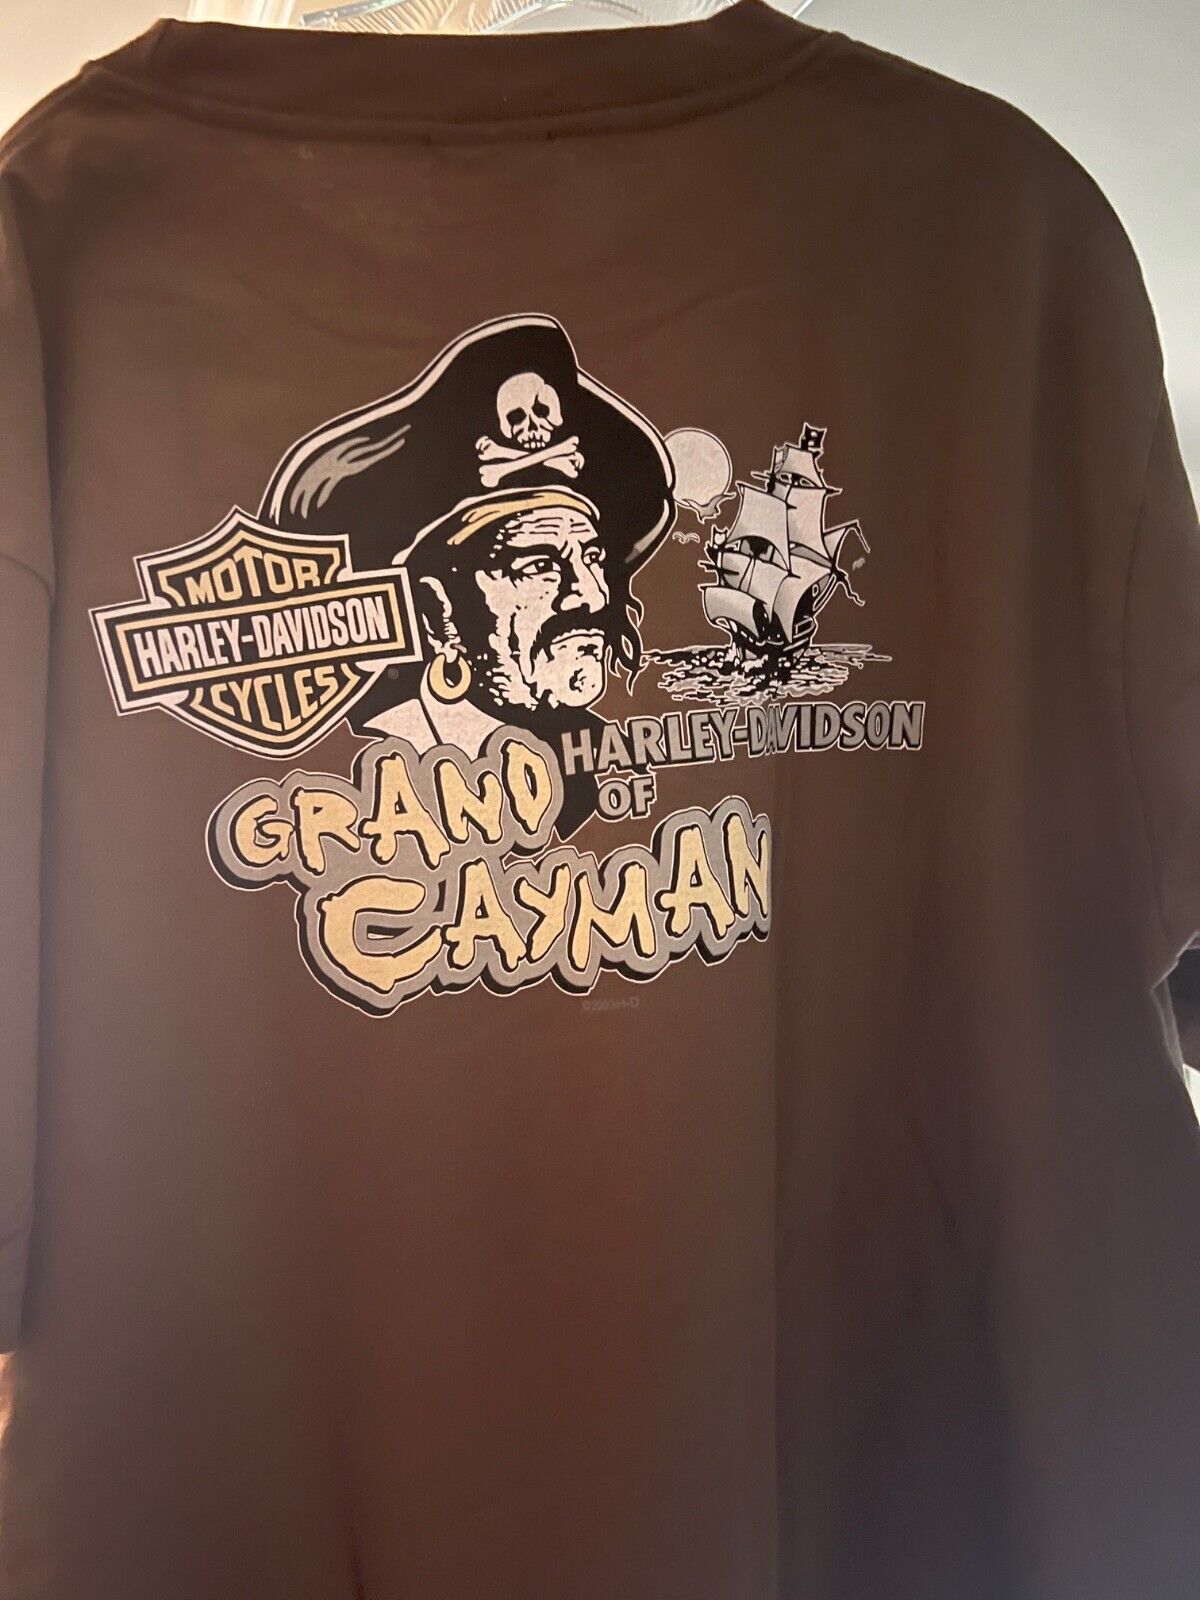 Grand Caymon Harley Davidson XLG Brown T Shirt Excellent